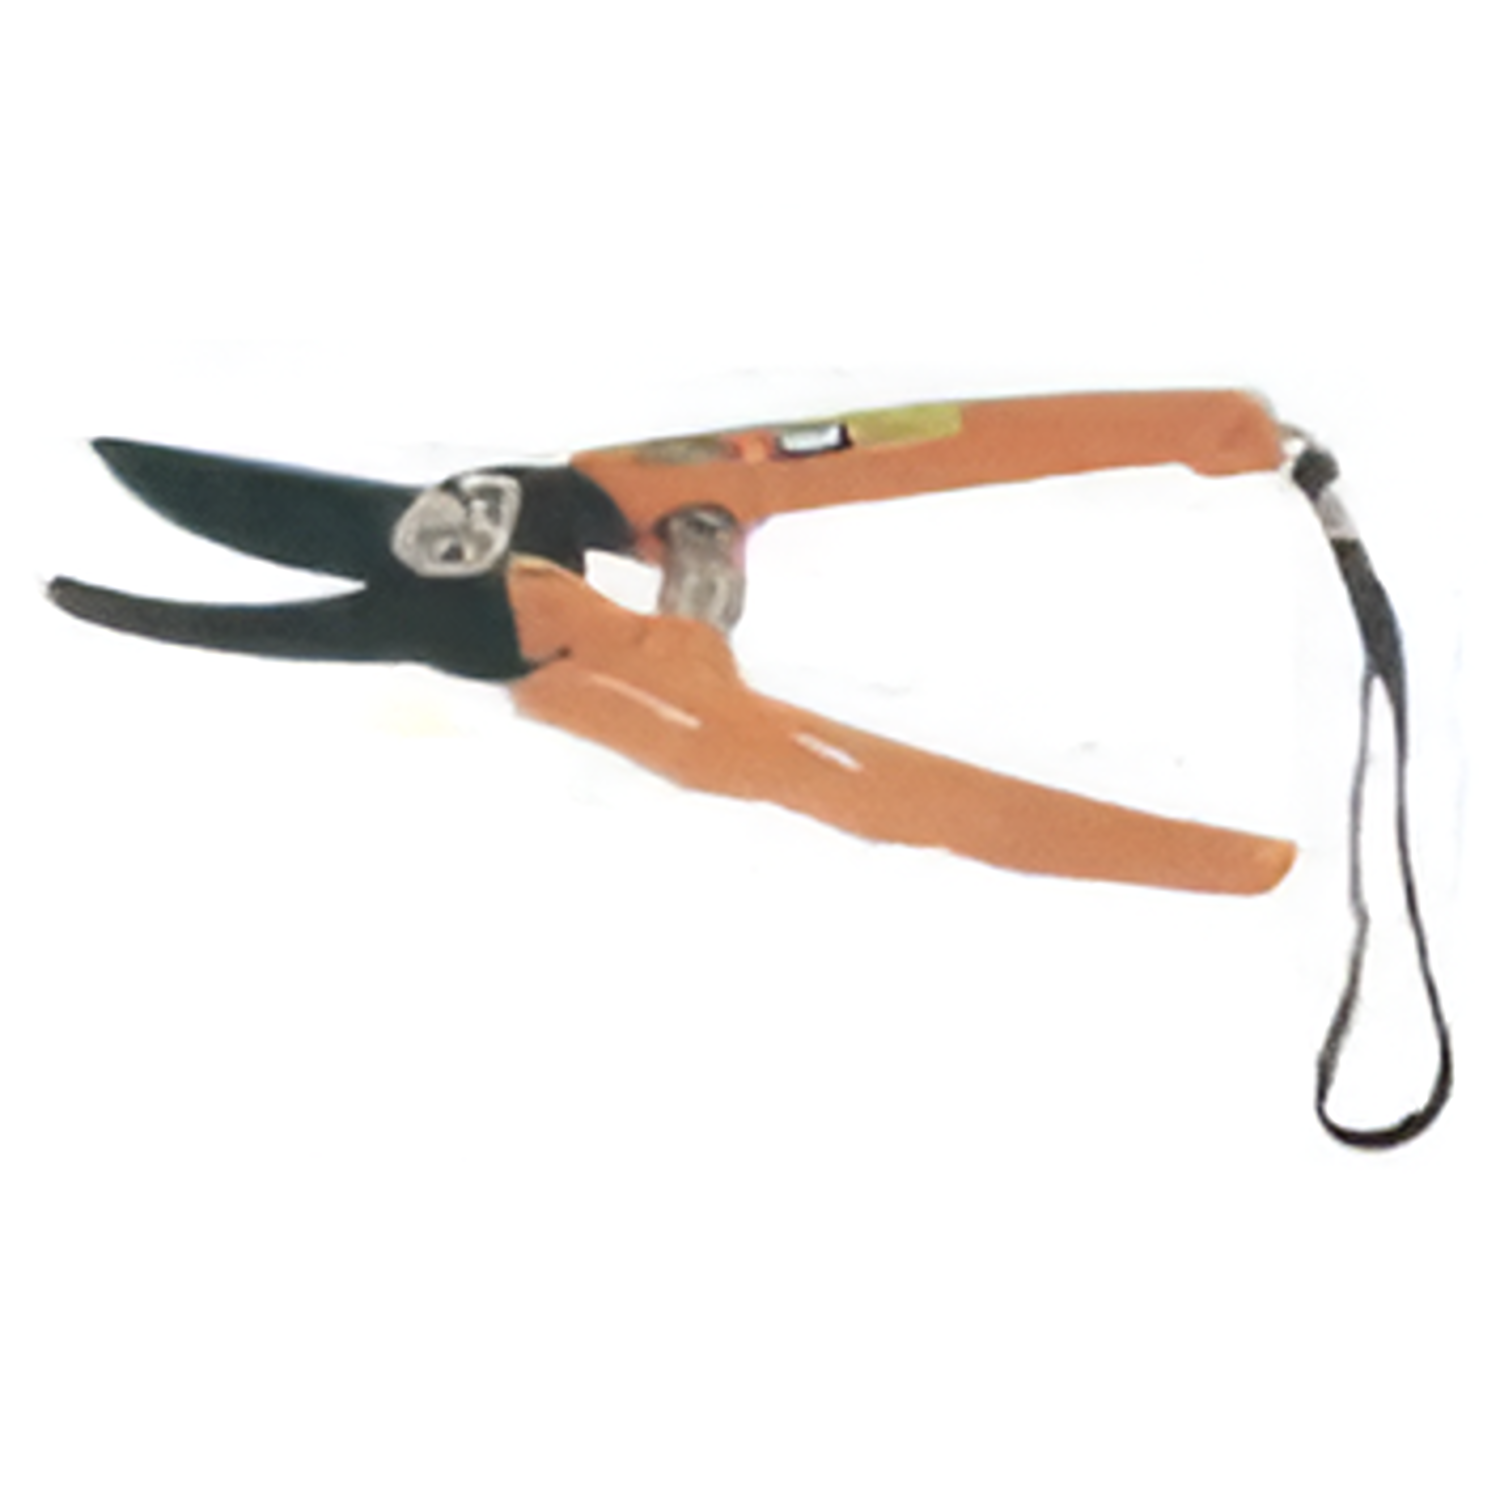 YEW AIK Pruning Shear 1250- 8” Extra Heavy Duty Non-Slip Handle - Premium Pruning Shear from YEW AIK - Shop now at Yew Aik.